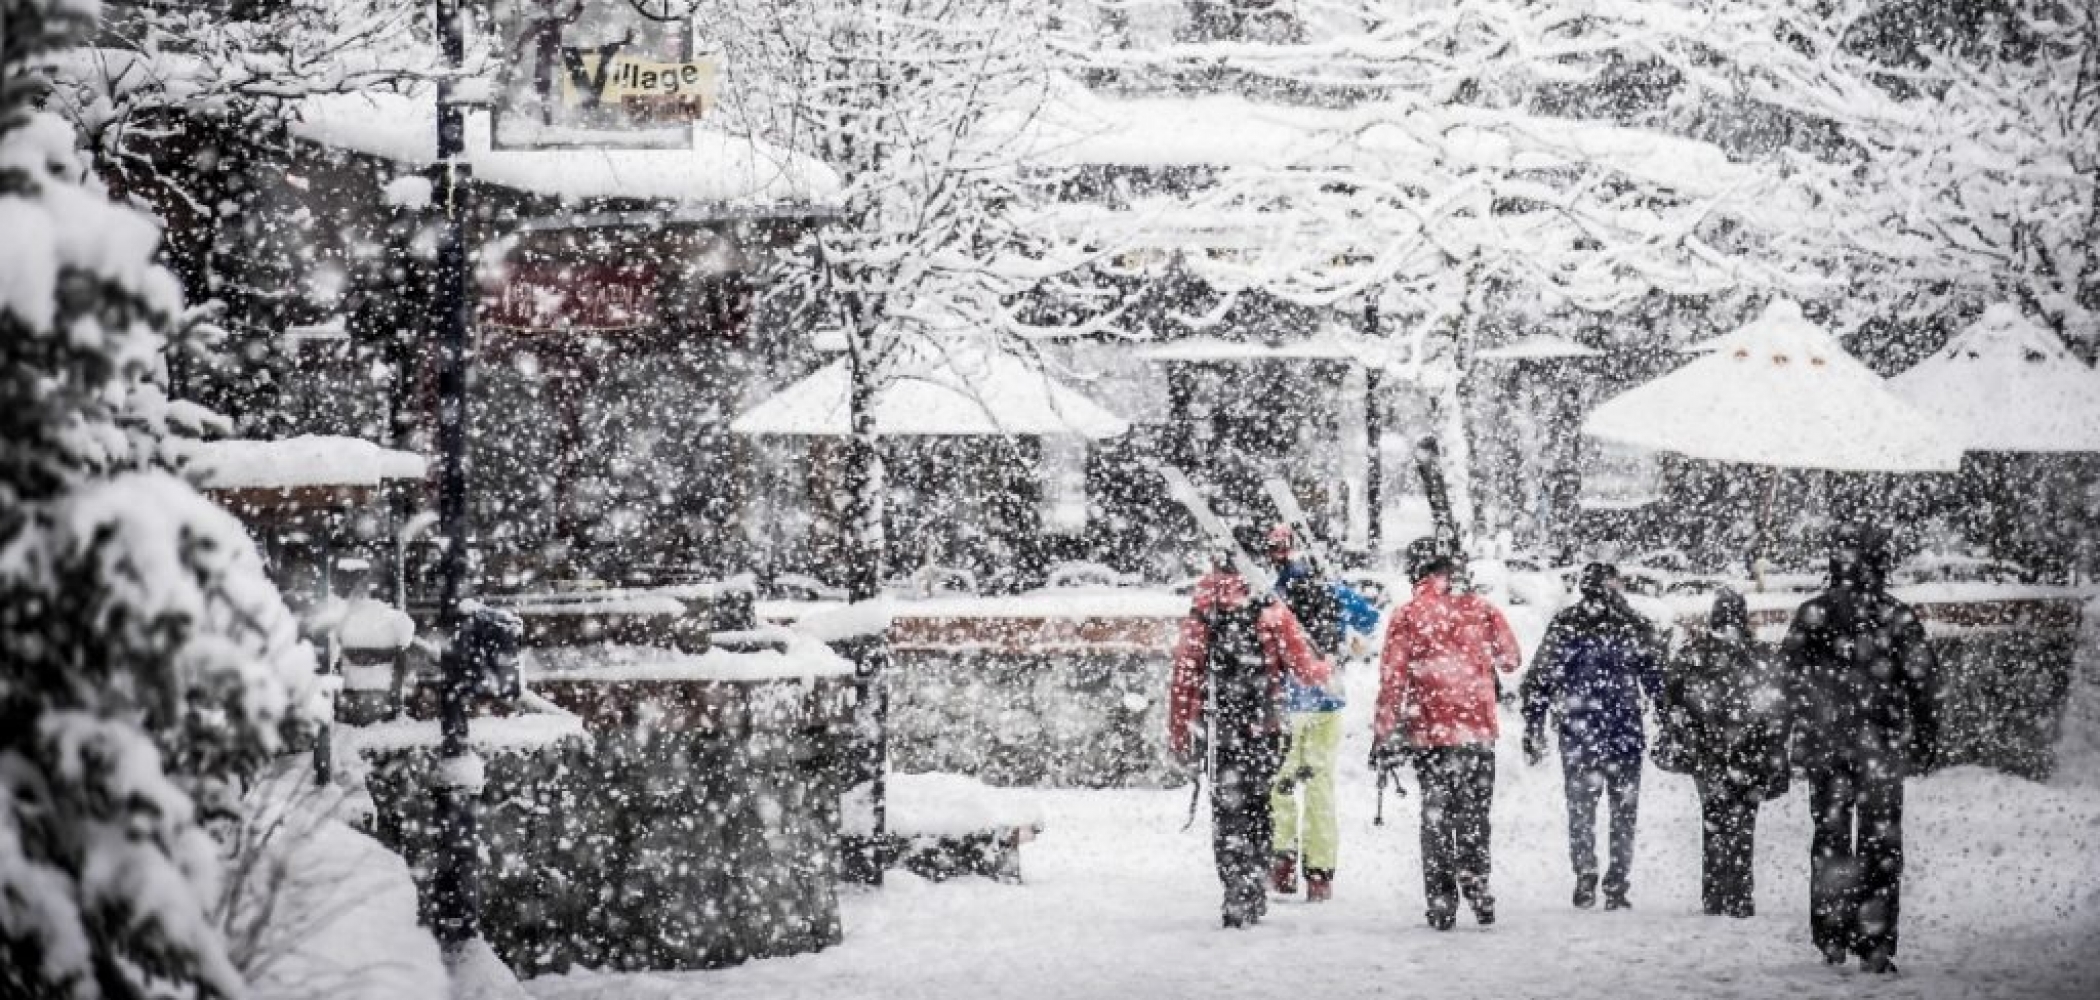 Strolling through Whistler Village on a snowy day.